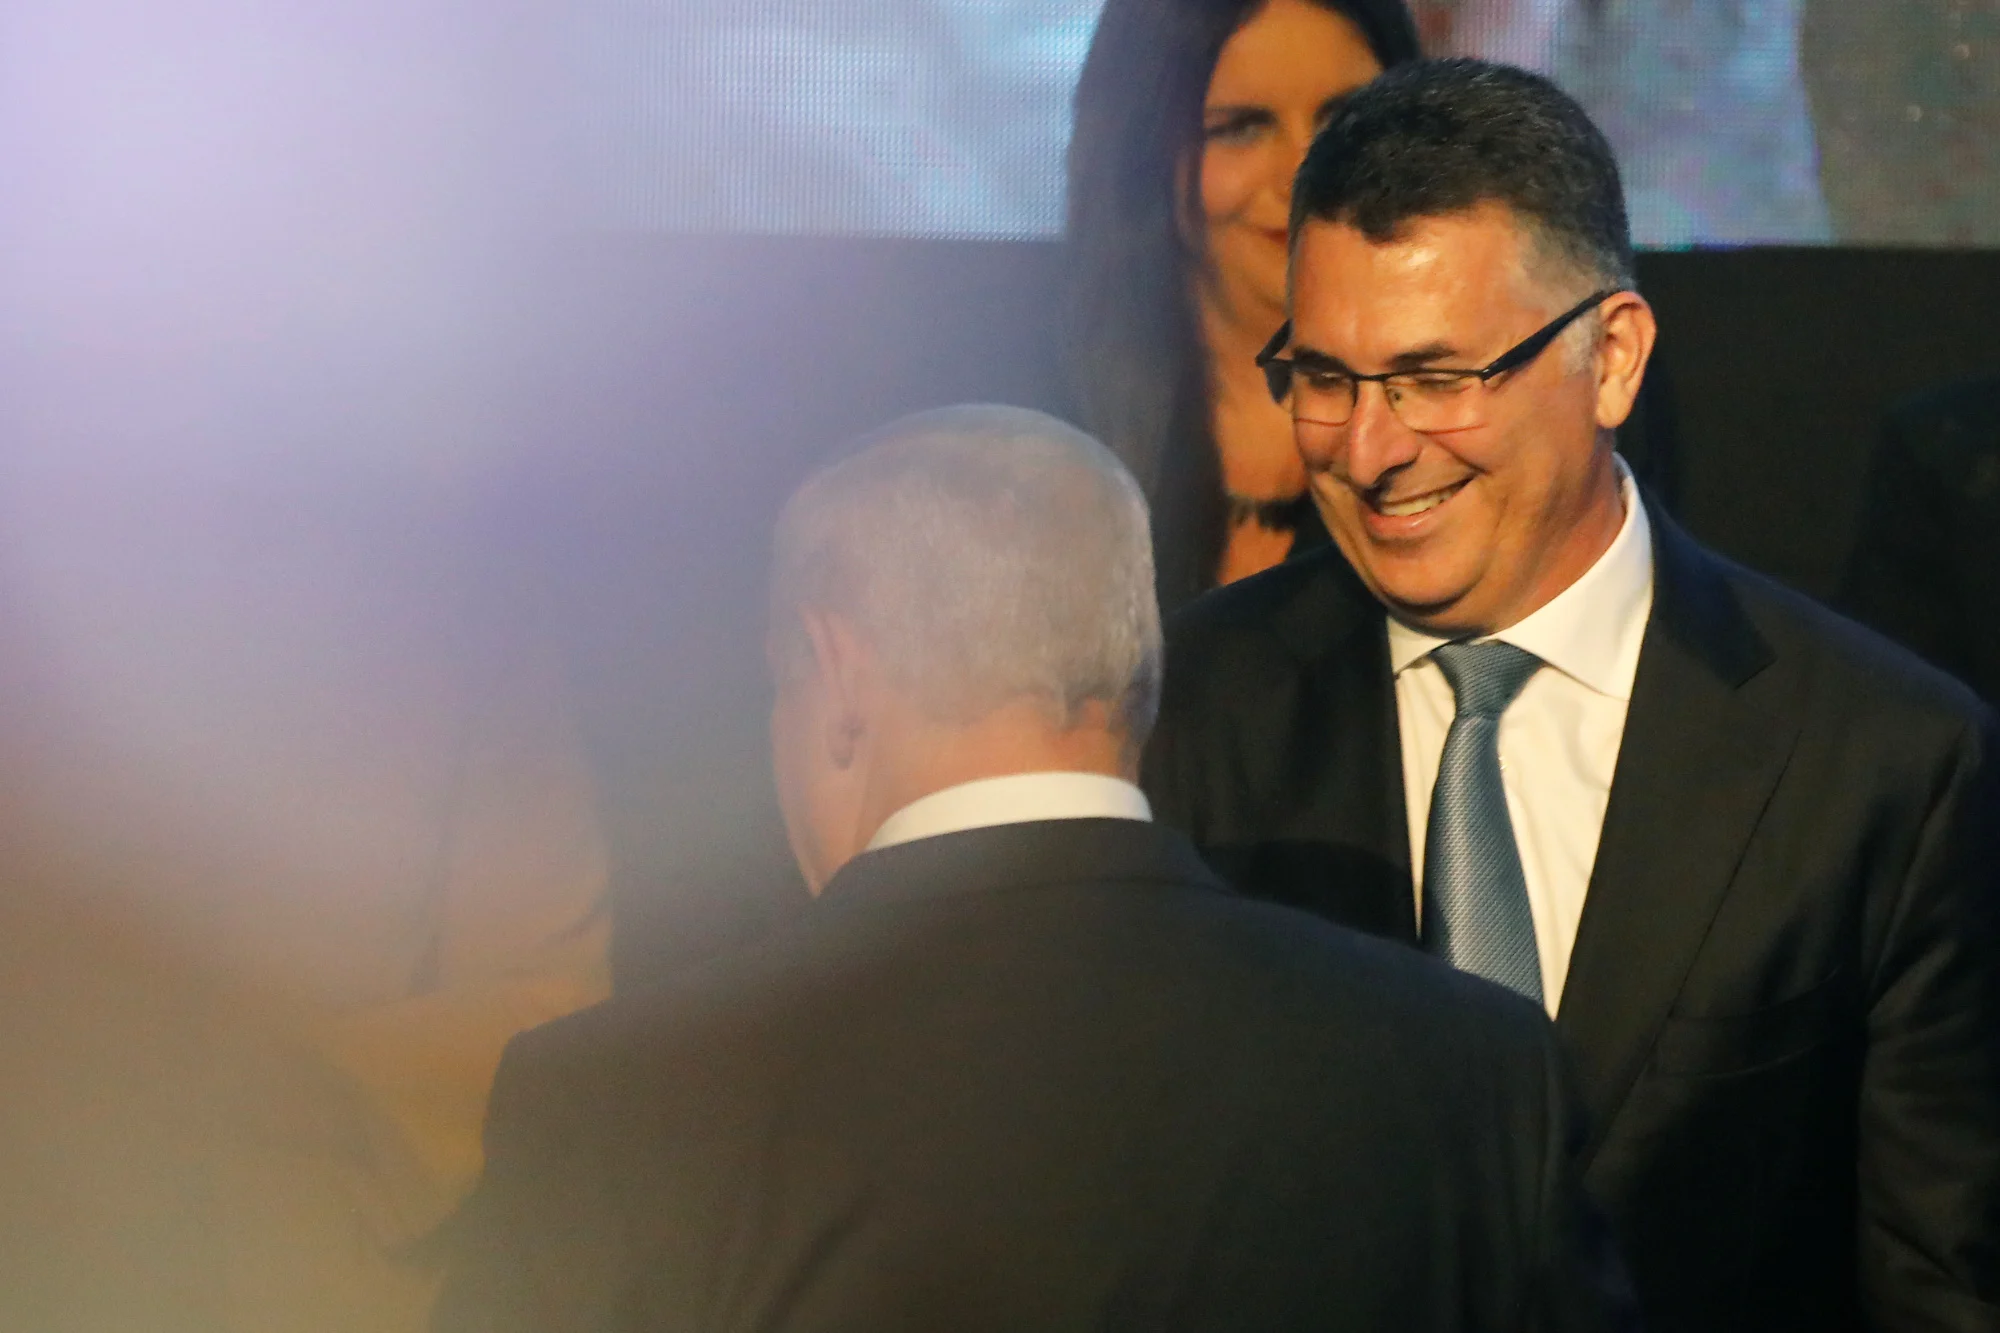 Likud Party Member Gideon Saar, Smiles As Israeli Prime Minister Benjamin Netanyahu Walks Nearby After Addressing Members Of His Right Wing Party Bloc At A Conference In Tel Aviv, Israel